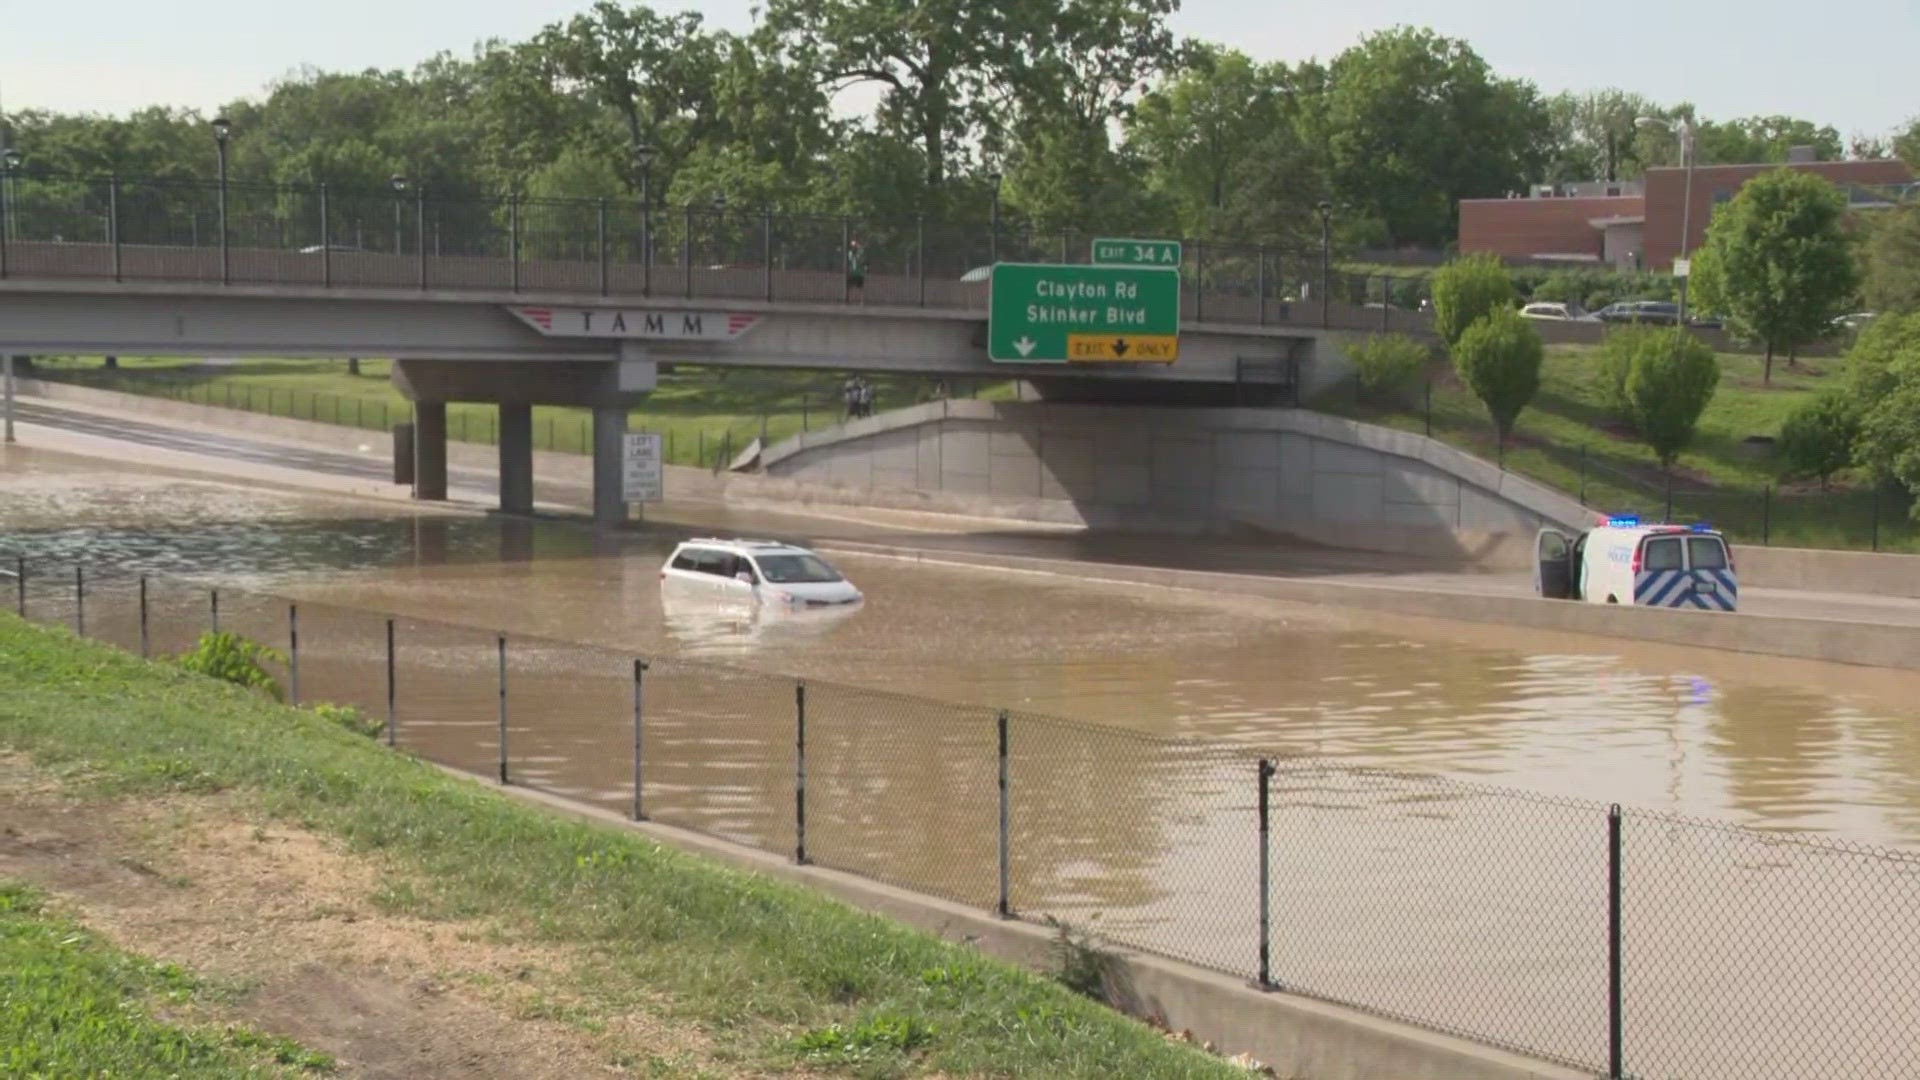 A water main break has flooded lanes of Interstate 64 near the Tamm Avenue overpass. At least one car appeared to be stranded in the water.